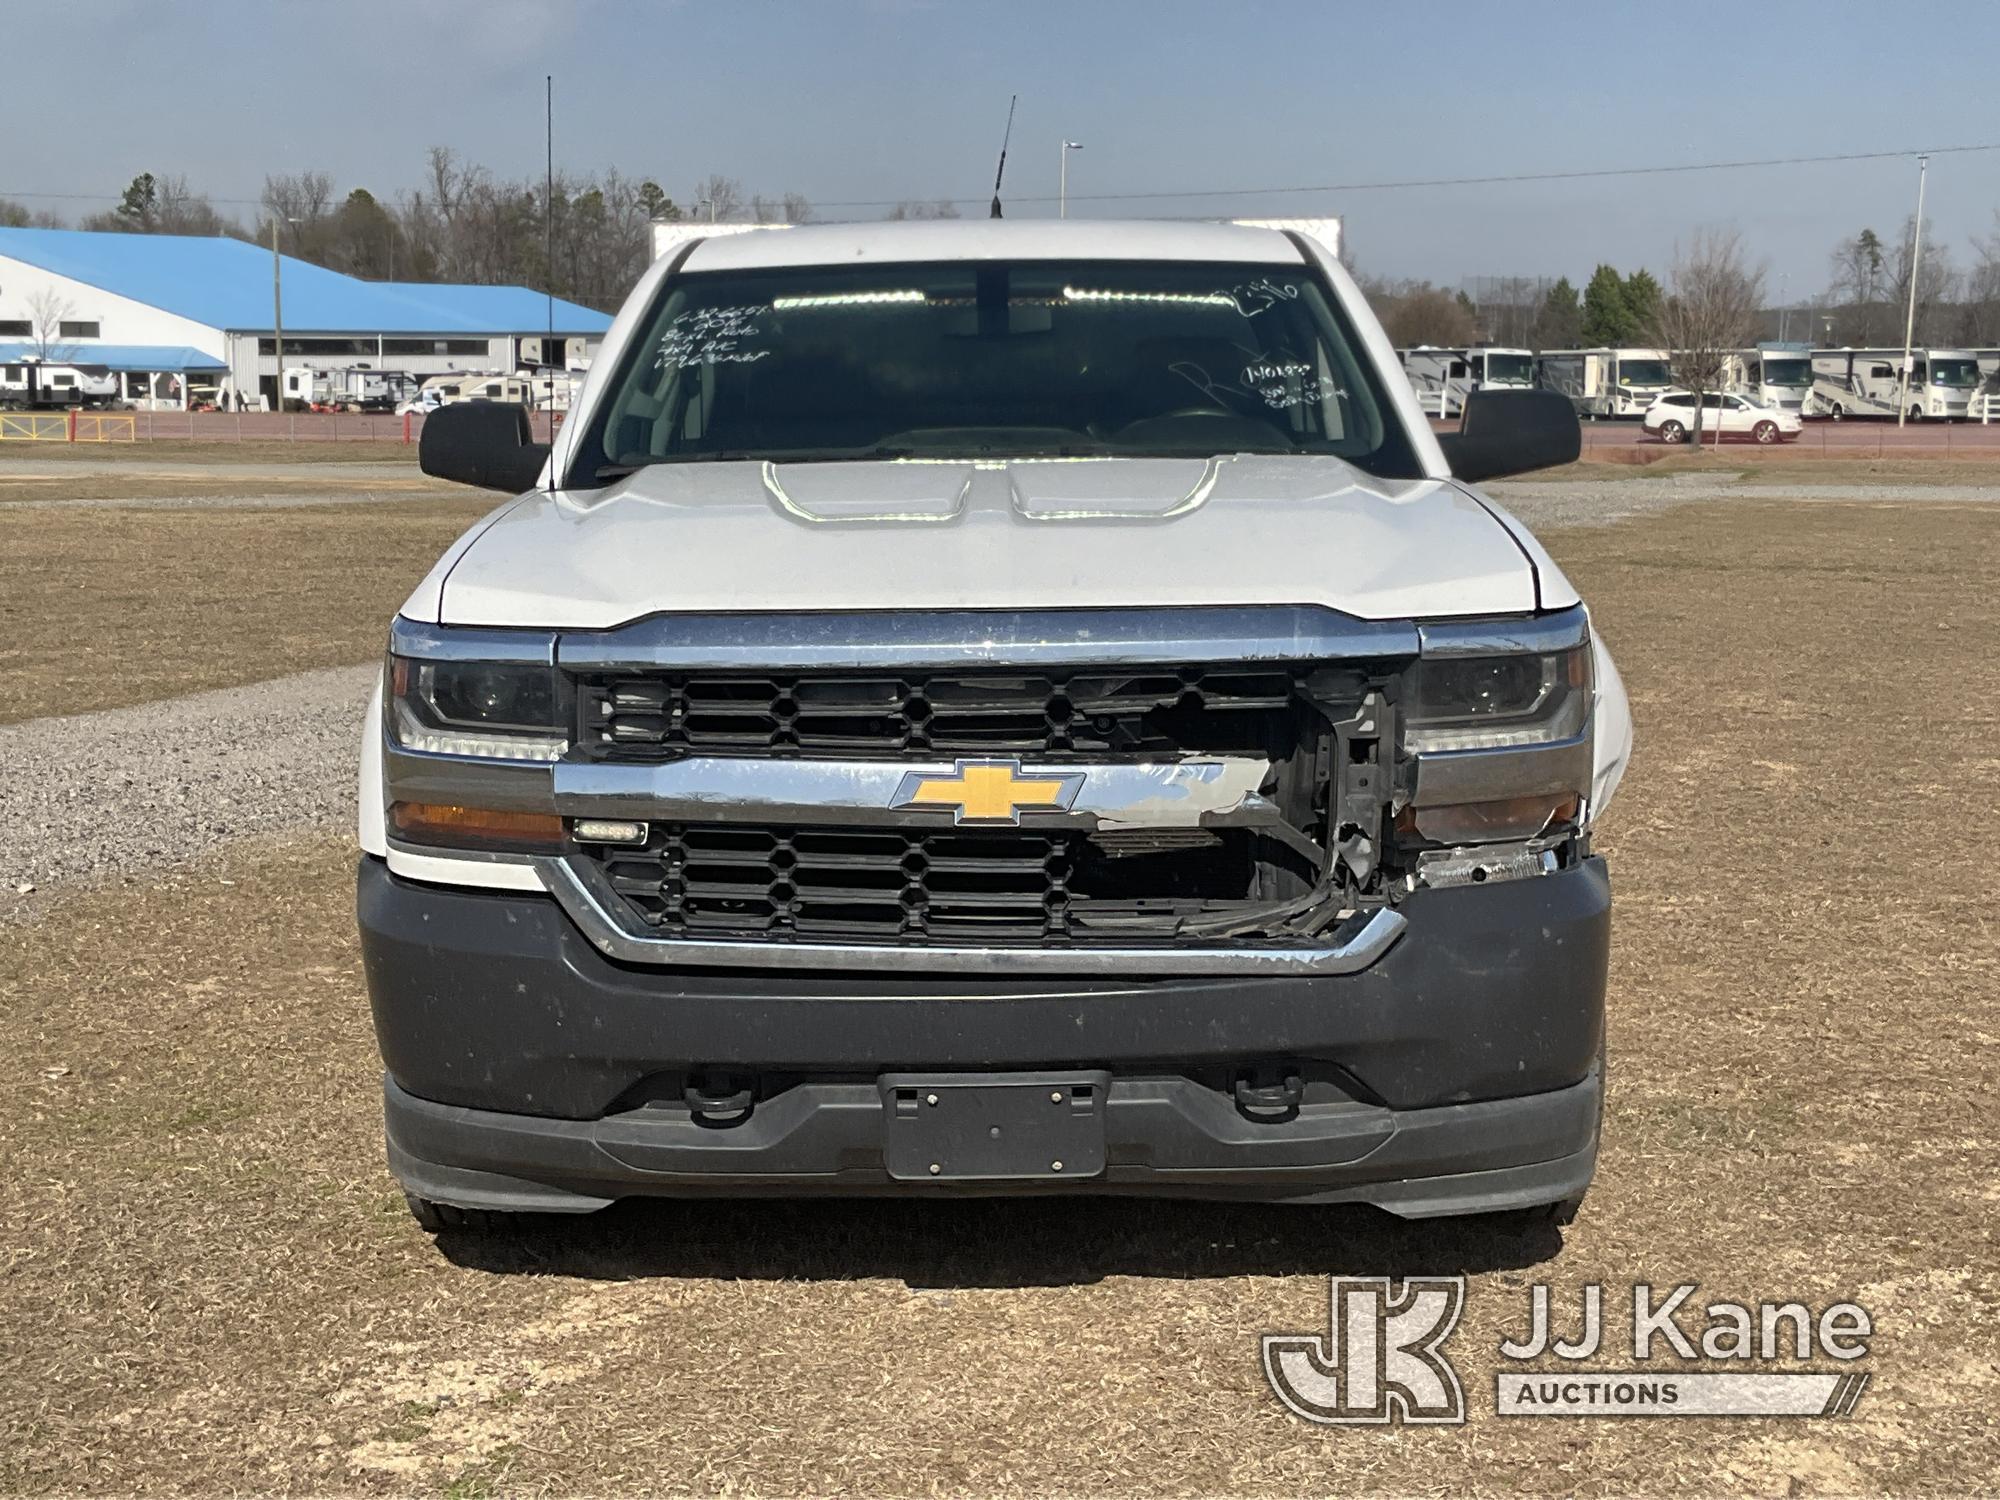 (Charlotte, NC) 2016 Chevrolet Silverado 1500 4x4 Extended-Cab Pickup Truck Runs & Moves) (Wrecked